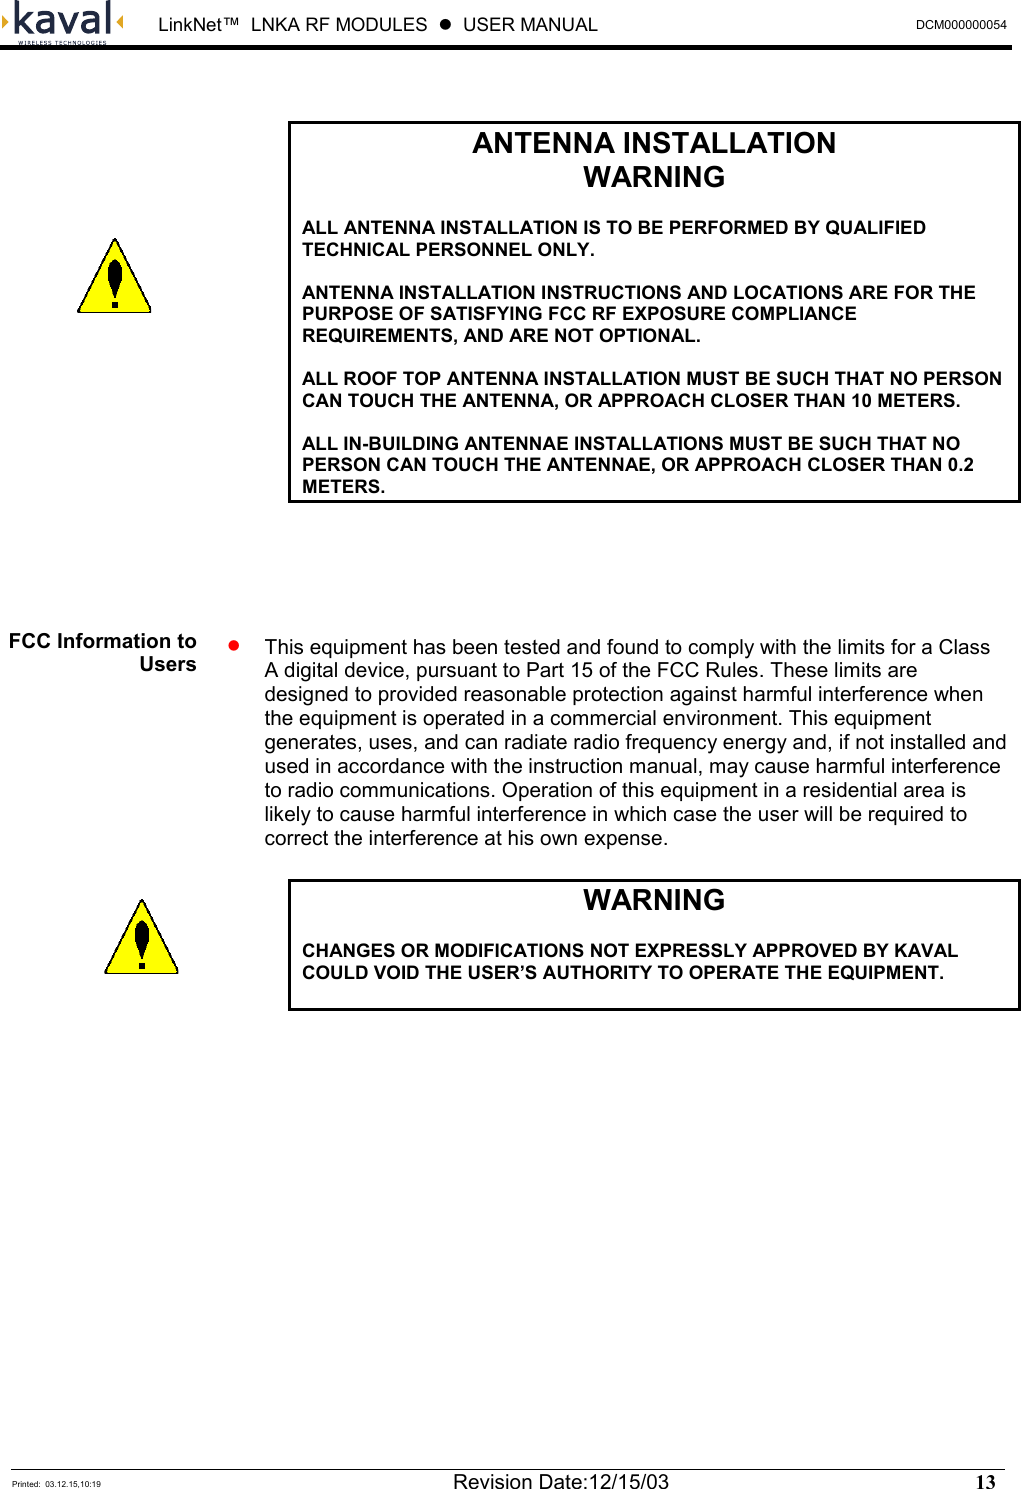  LinkNet™  LNKA RF MODULES  z  USER MANUAL  DCM000000054  Printed:  03.12.15,10:19  Revision Date:12/15/03   13     ANTENNA INSTALLATION WARNING  ALL ANTENNA INSTALLATION IS TO BE PERFORMED BY QUALIFIED TECHNICAL PERSONNEL ONLY.  ANTENNA INSTALLATION INSTRUCTIONS AND LOCATIONS ARE FOR THE PURPOSE OF SATISFYING FCC RF EXPOSURE COMPLIANCE REQUIREMENTS, AND ARE NOT OPTIONAL.  ALL ROOF TOP ANTENNA INSTALLATION MUST BE SUCH THAT NO PERSON CAN TOUCH THE ANTENNA, OR APPROACH CLOSER THAN 10 METERS.   ALL IN-BUILDING ANTENNAE INSTALLATIONS MUST BE SUCH THAT NO PERSON CAN TOUCH THE ANTENNAE, OR APPROACH CLOSER THAN 0.2 METERS.    •  This equipment has been tested and found to comply with the limits for a Class A digital device, pursuant to Part 15 of the FCC Rules. These limits are designed to provided reasonable protection against harmful interference when the equipment is operated in a commercial environment. This equipment generates, uses, and can radiate radio frequency energy and, if not installed and used in accordance with the instruction manual, may cause harmful interference to radio communications. Operation of this equipment in a residential area is likely to cause harmful interference in which case the user will be required to correct the interference at his own expense.  WARNING  CHANGES OR MODIFICATIONS NOT EXPRESSLY APPROVED BY KAVAL COULD VOID THE USER’S AUTHORITY TO OPERATE THE EQUIPMENT.    FCC Information to Users   